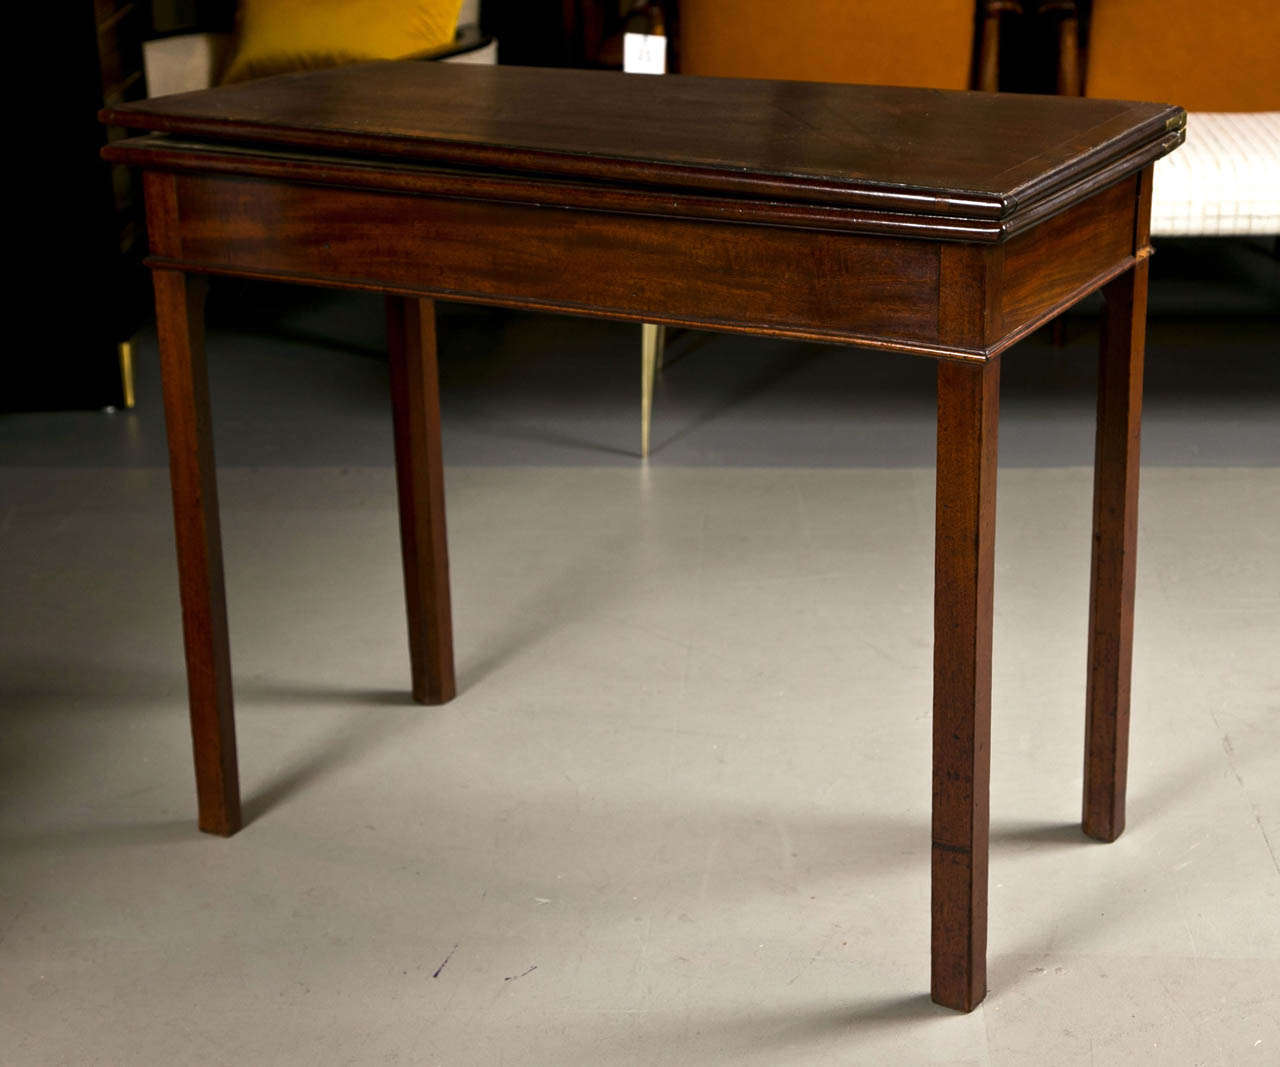 Great English game table with extendable base . Has great polished finish.